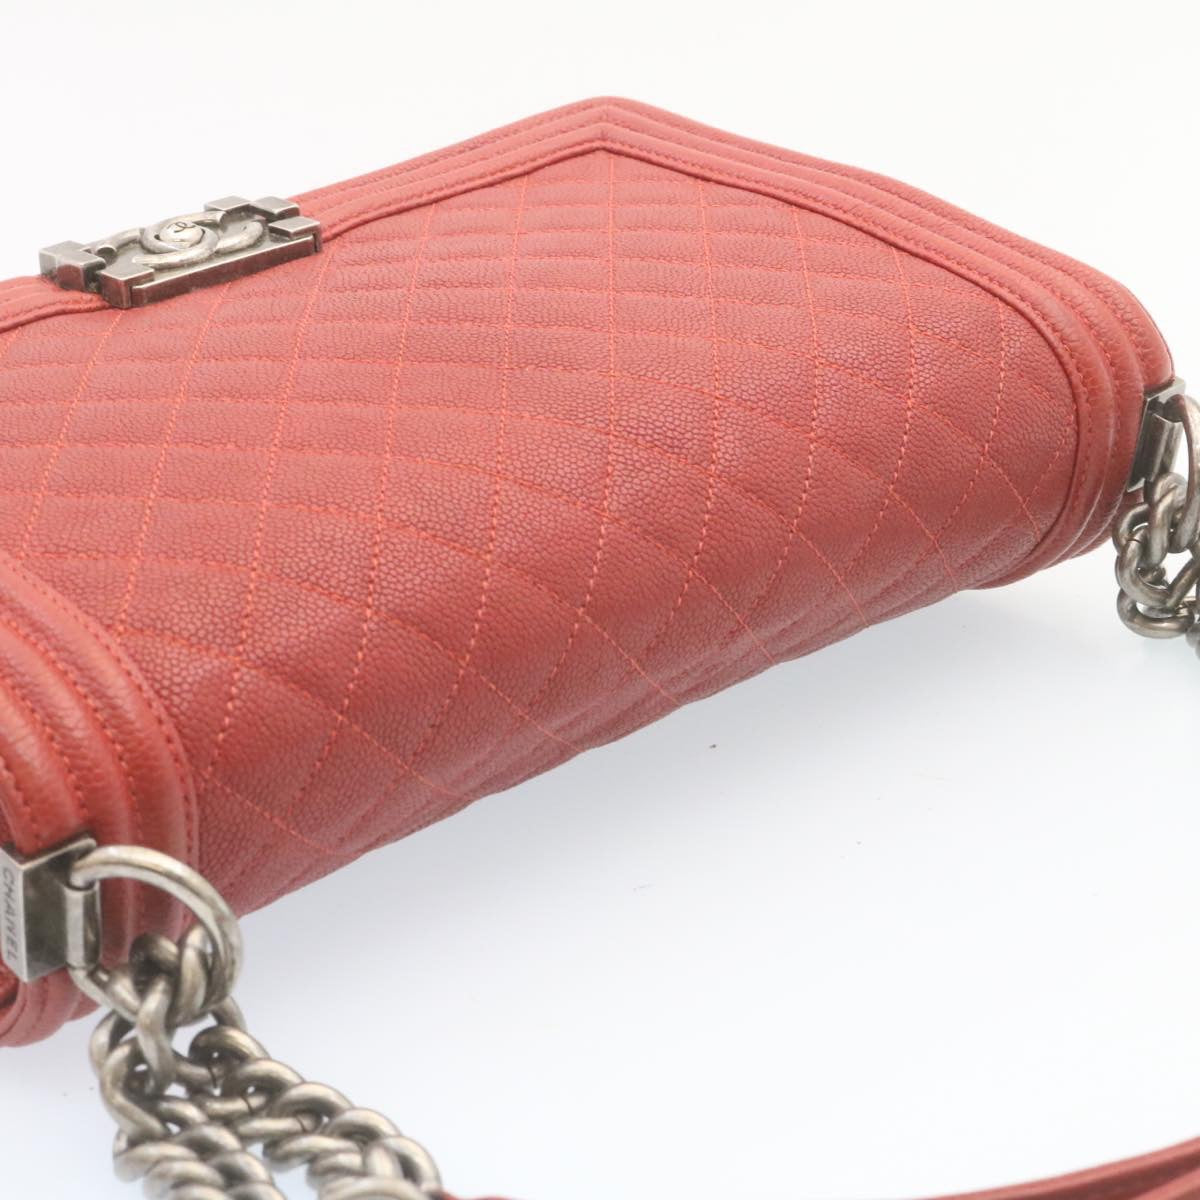 CHANEL Boy Chanel Matelasse Chain Flap Shoulder Bag Leather Red CC Auth 28281A